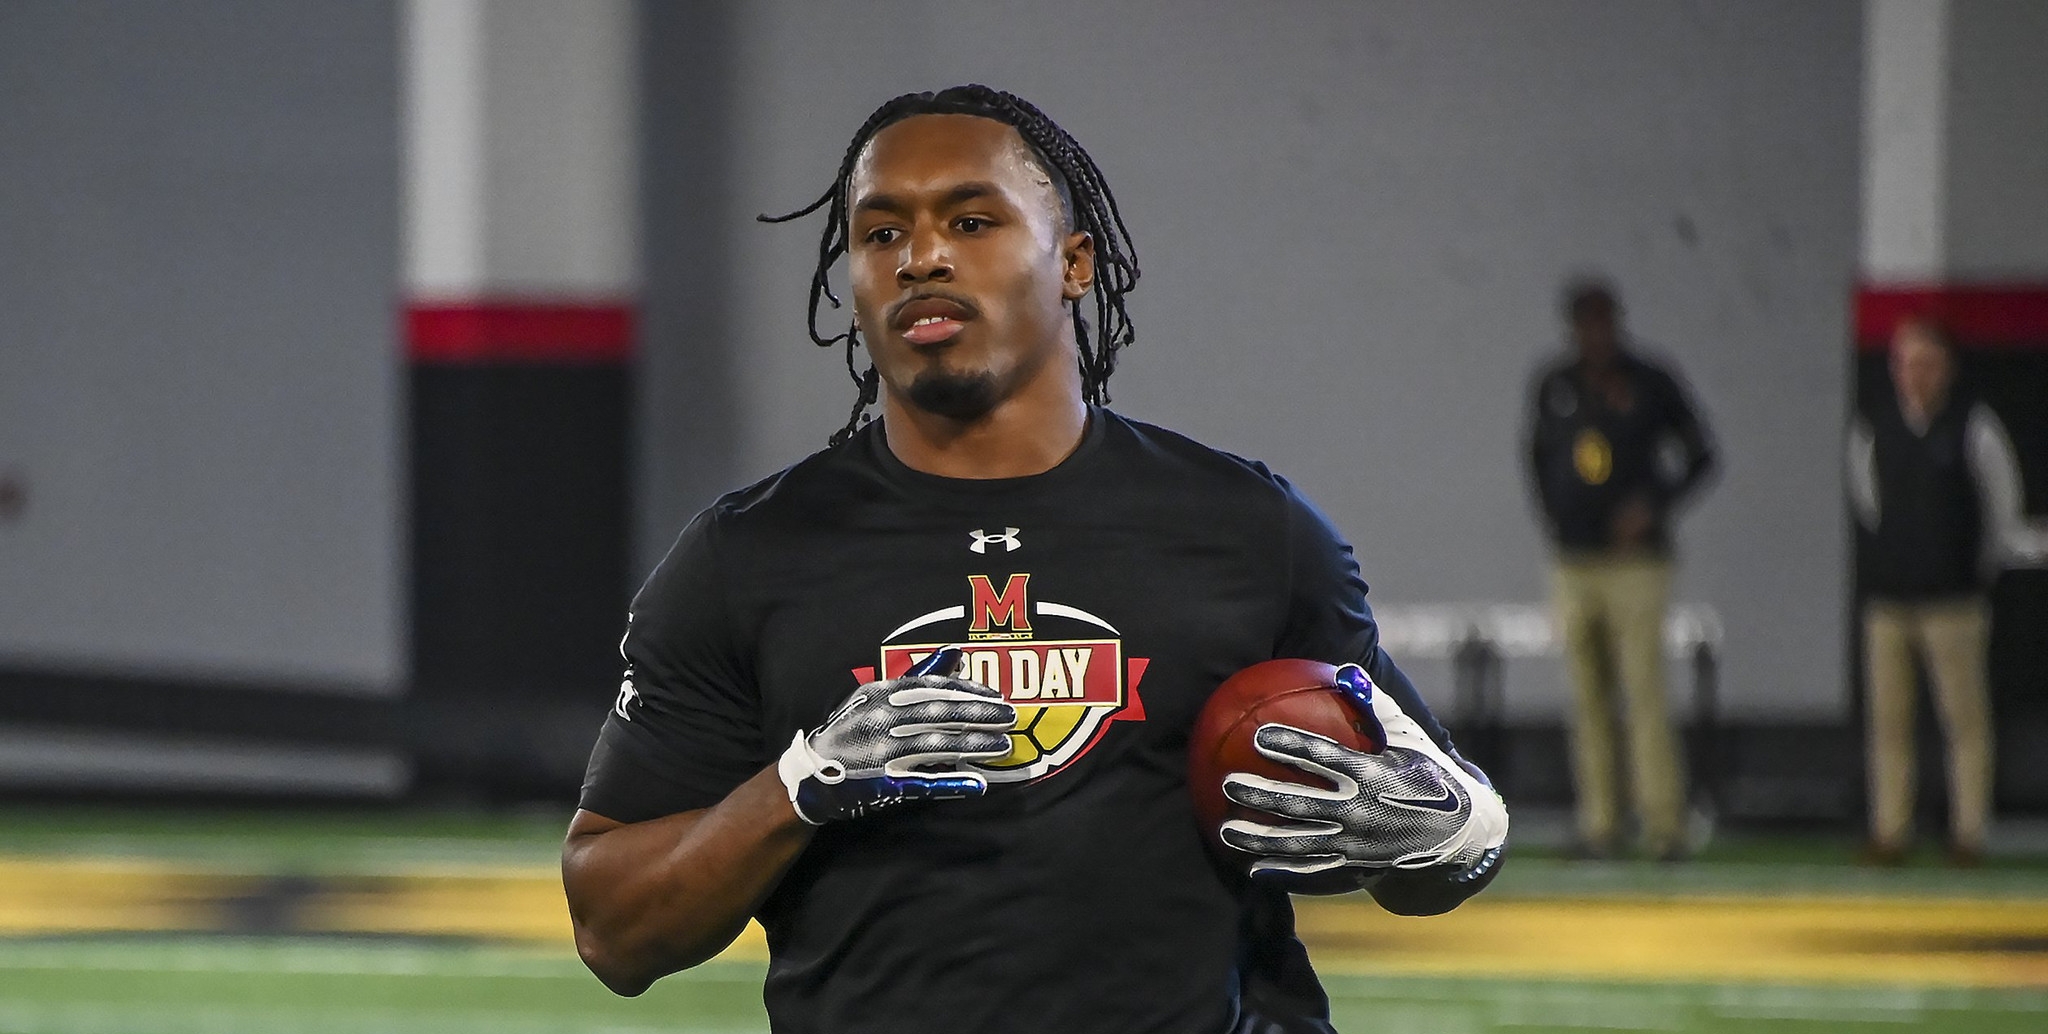 As NFL draft approaches, Maryland football safety Nick Cross sees